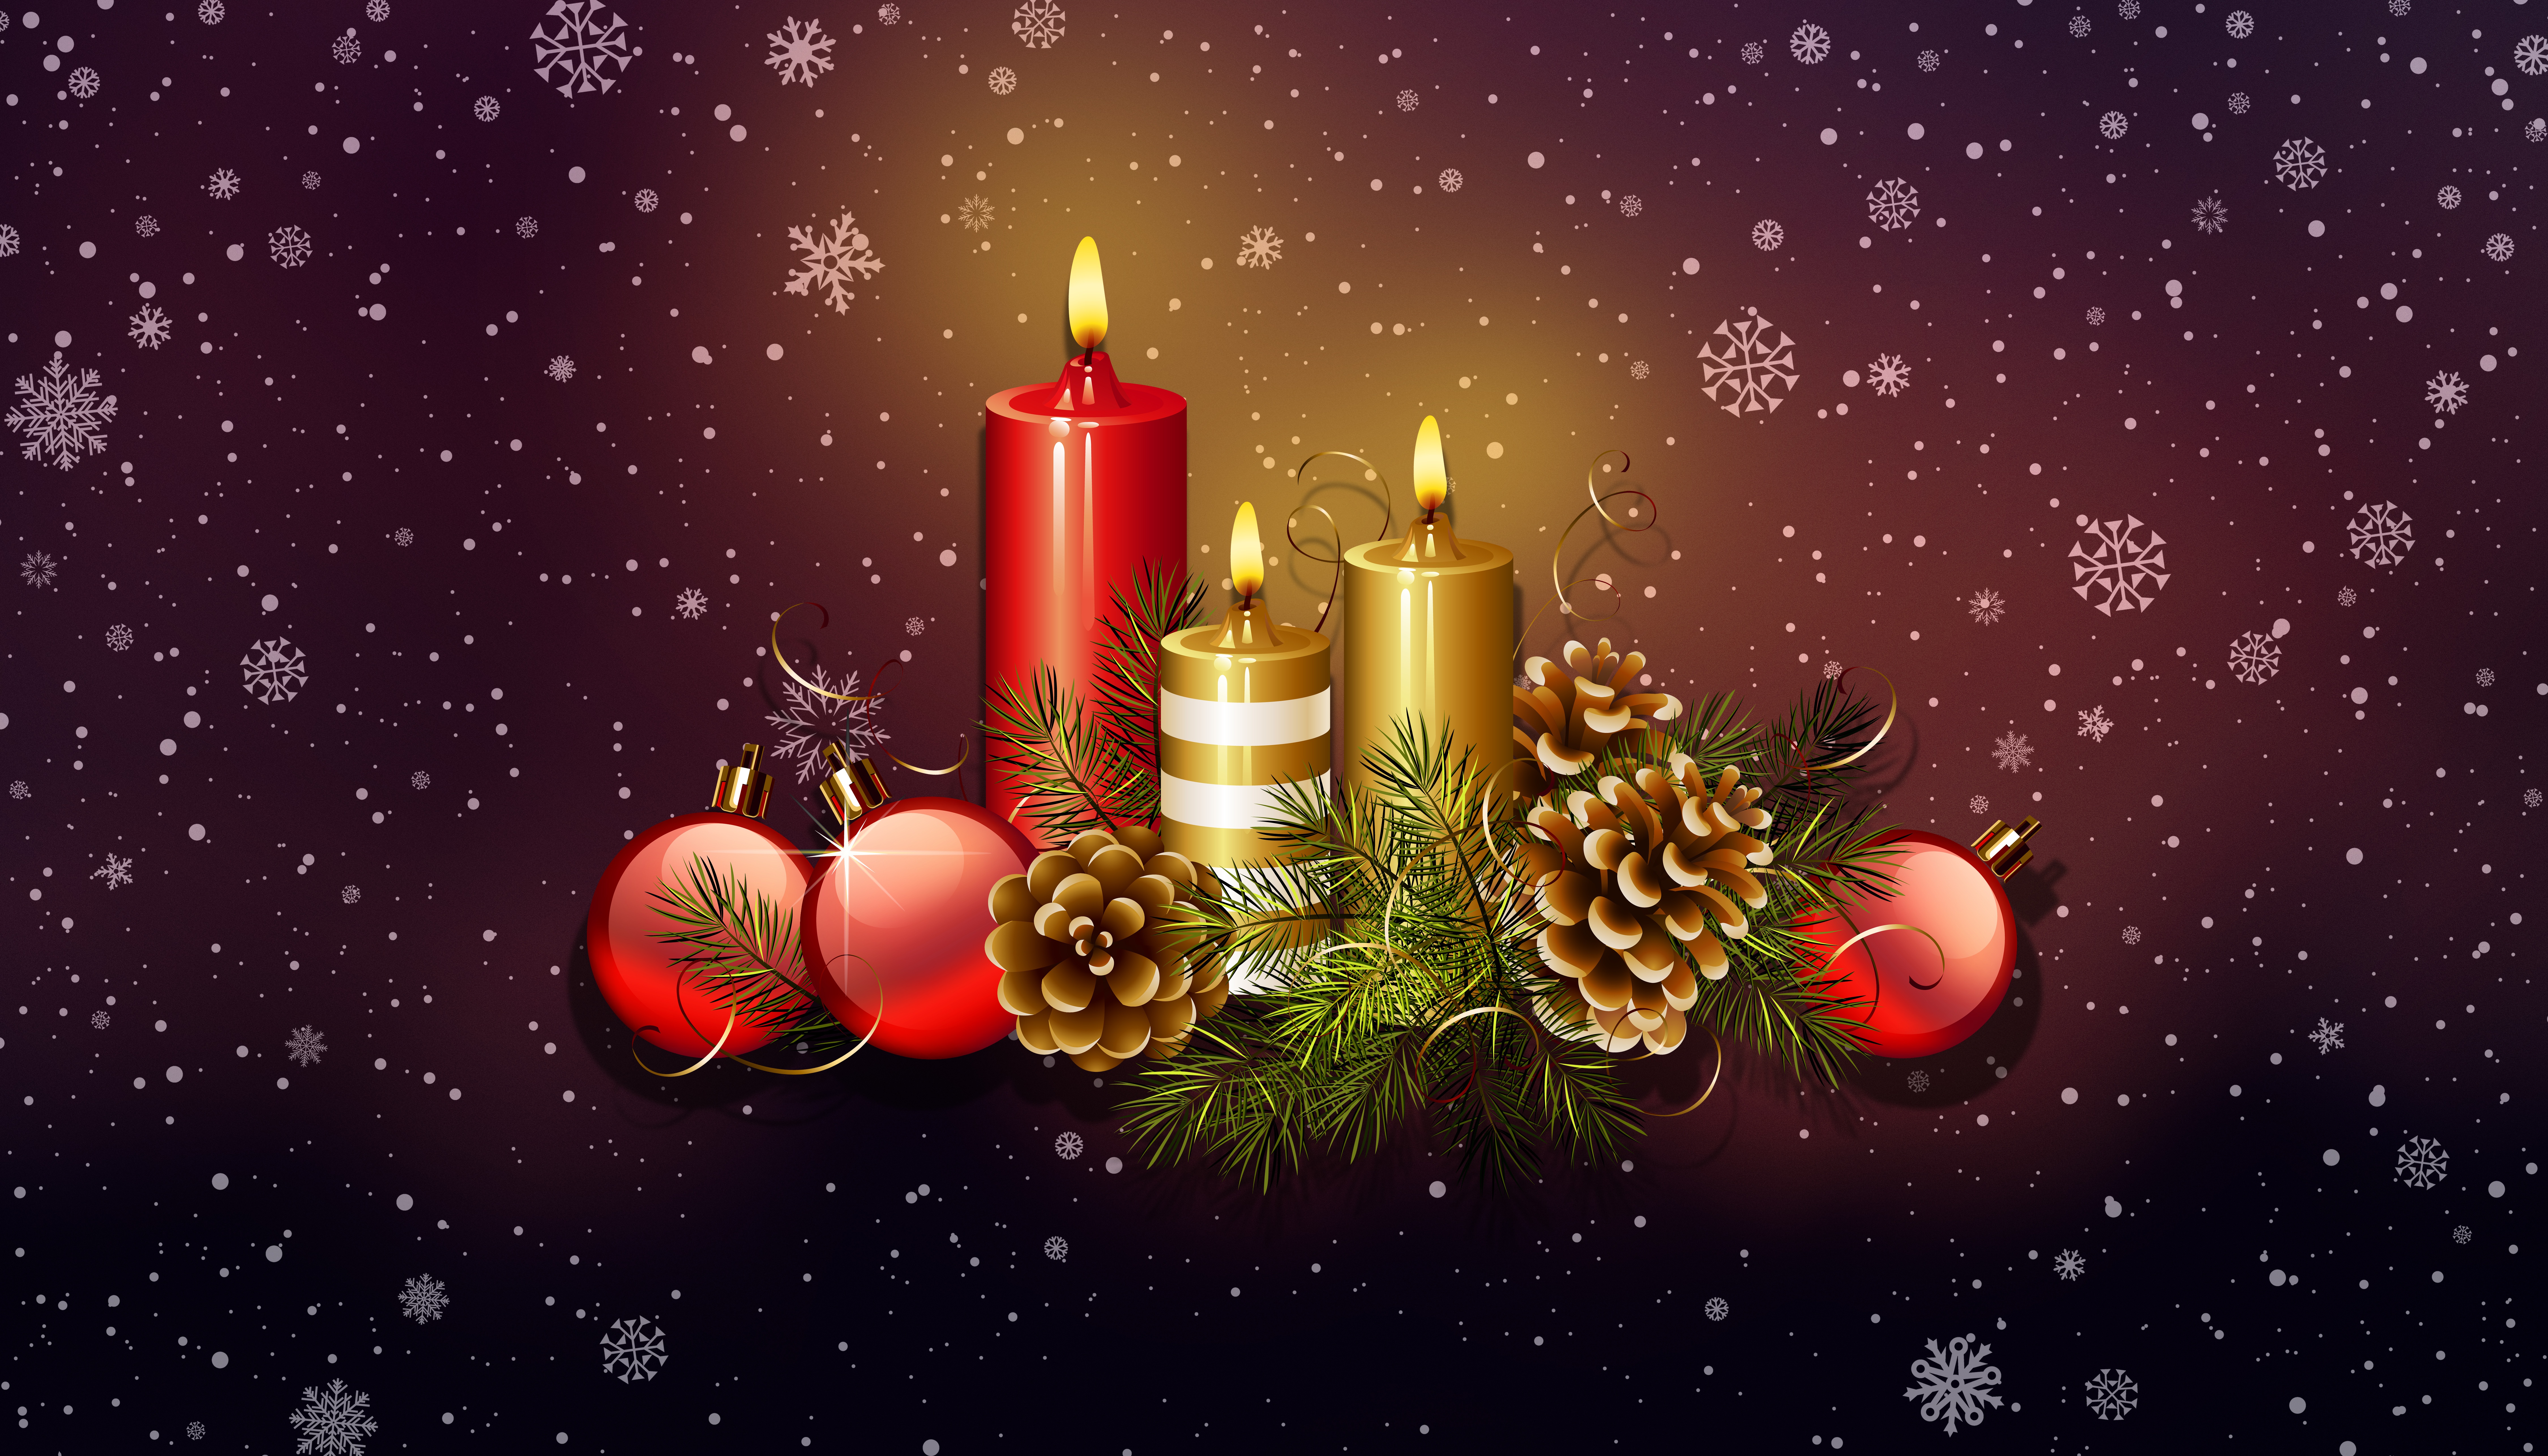 Wallpapers Christmas ornament elements candles on the desktop